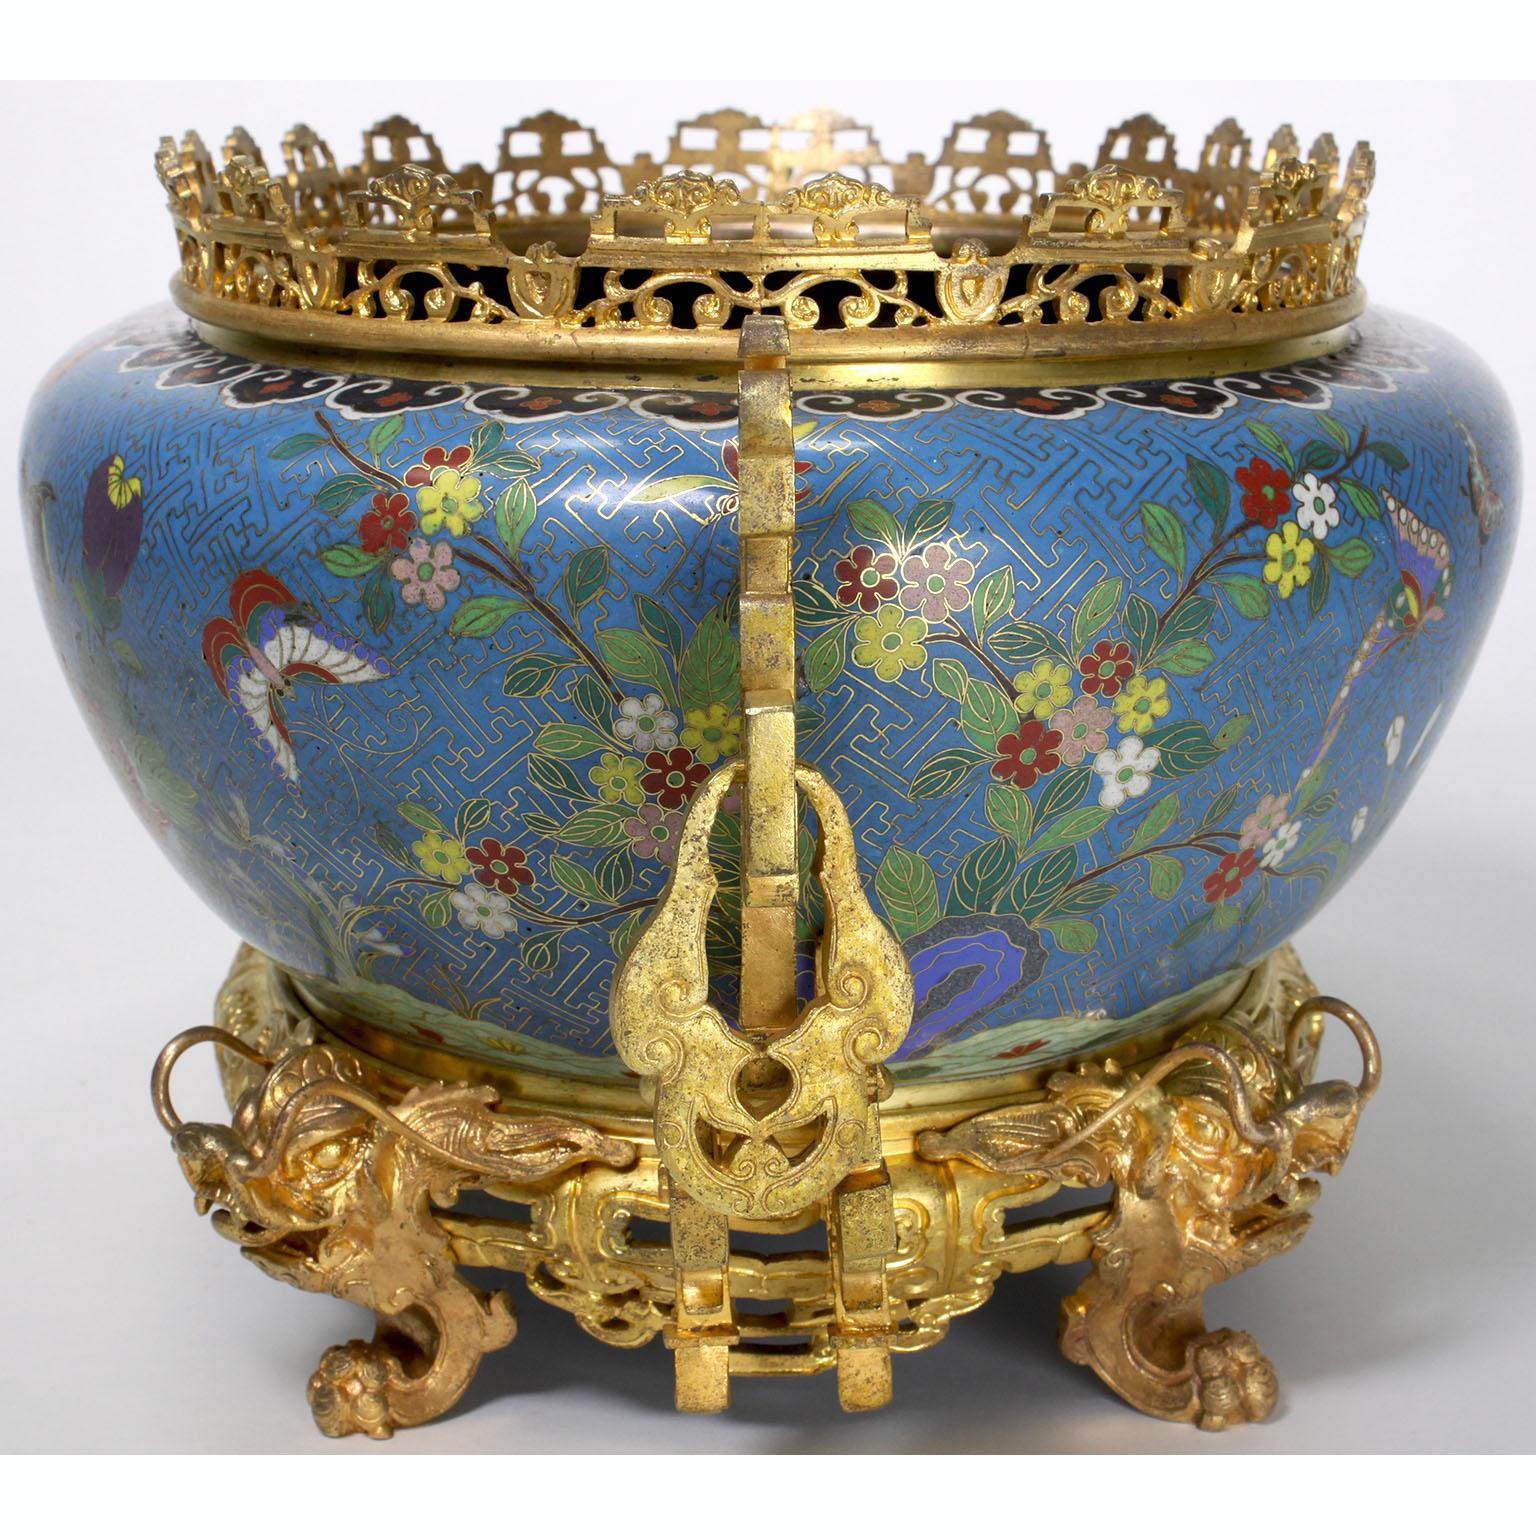 Early 20th Century Chinese 19th-20th Century Gilt Bronze Mounted Cloisonné Jardinière 'Planter' For Sale